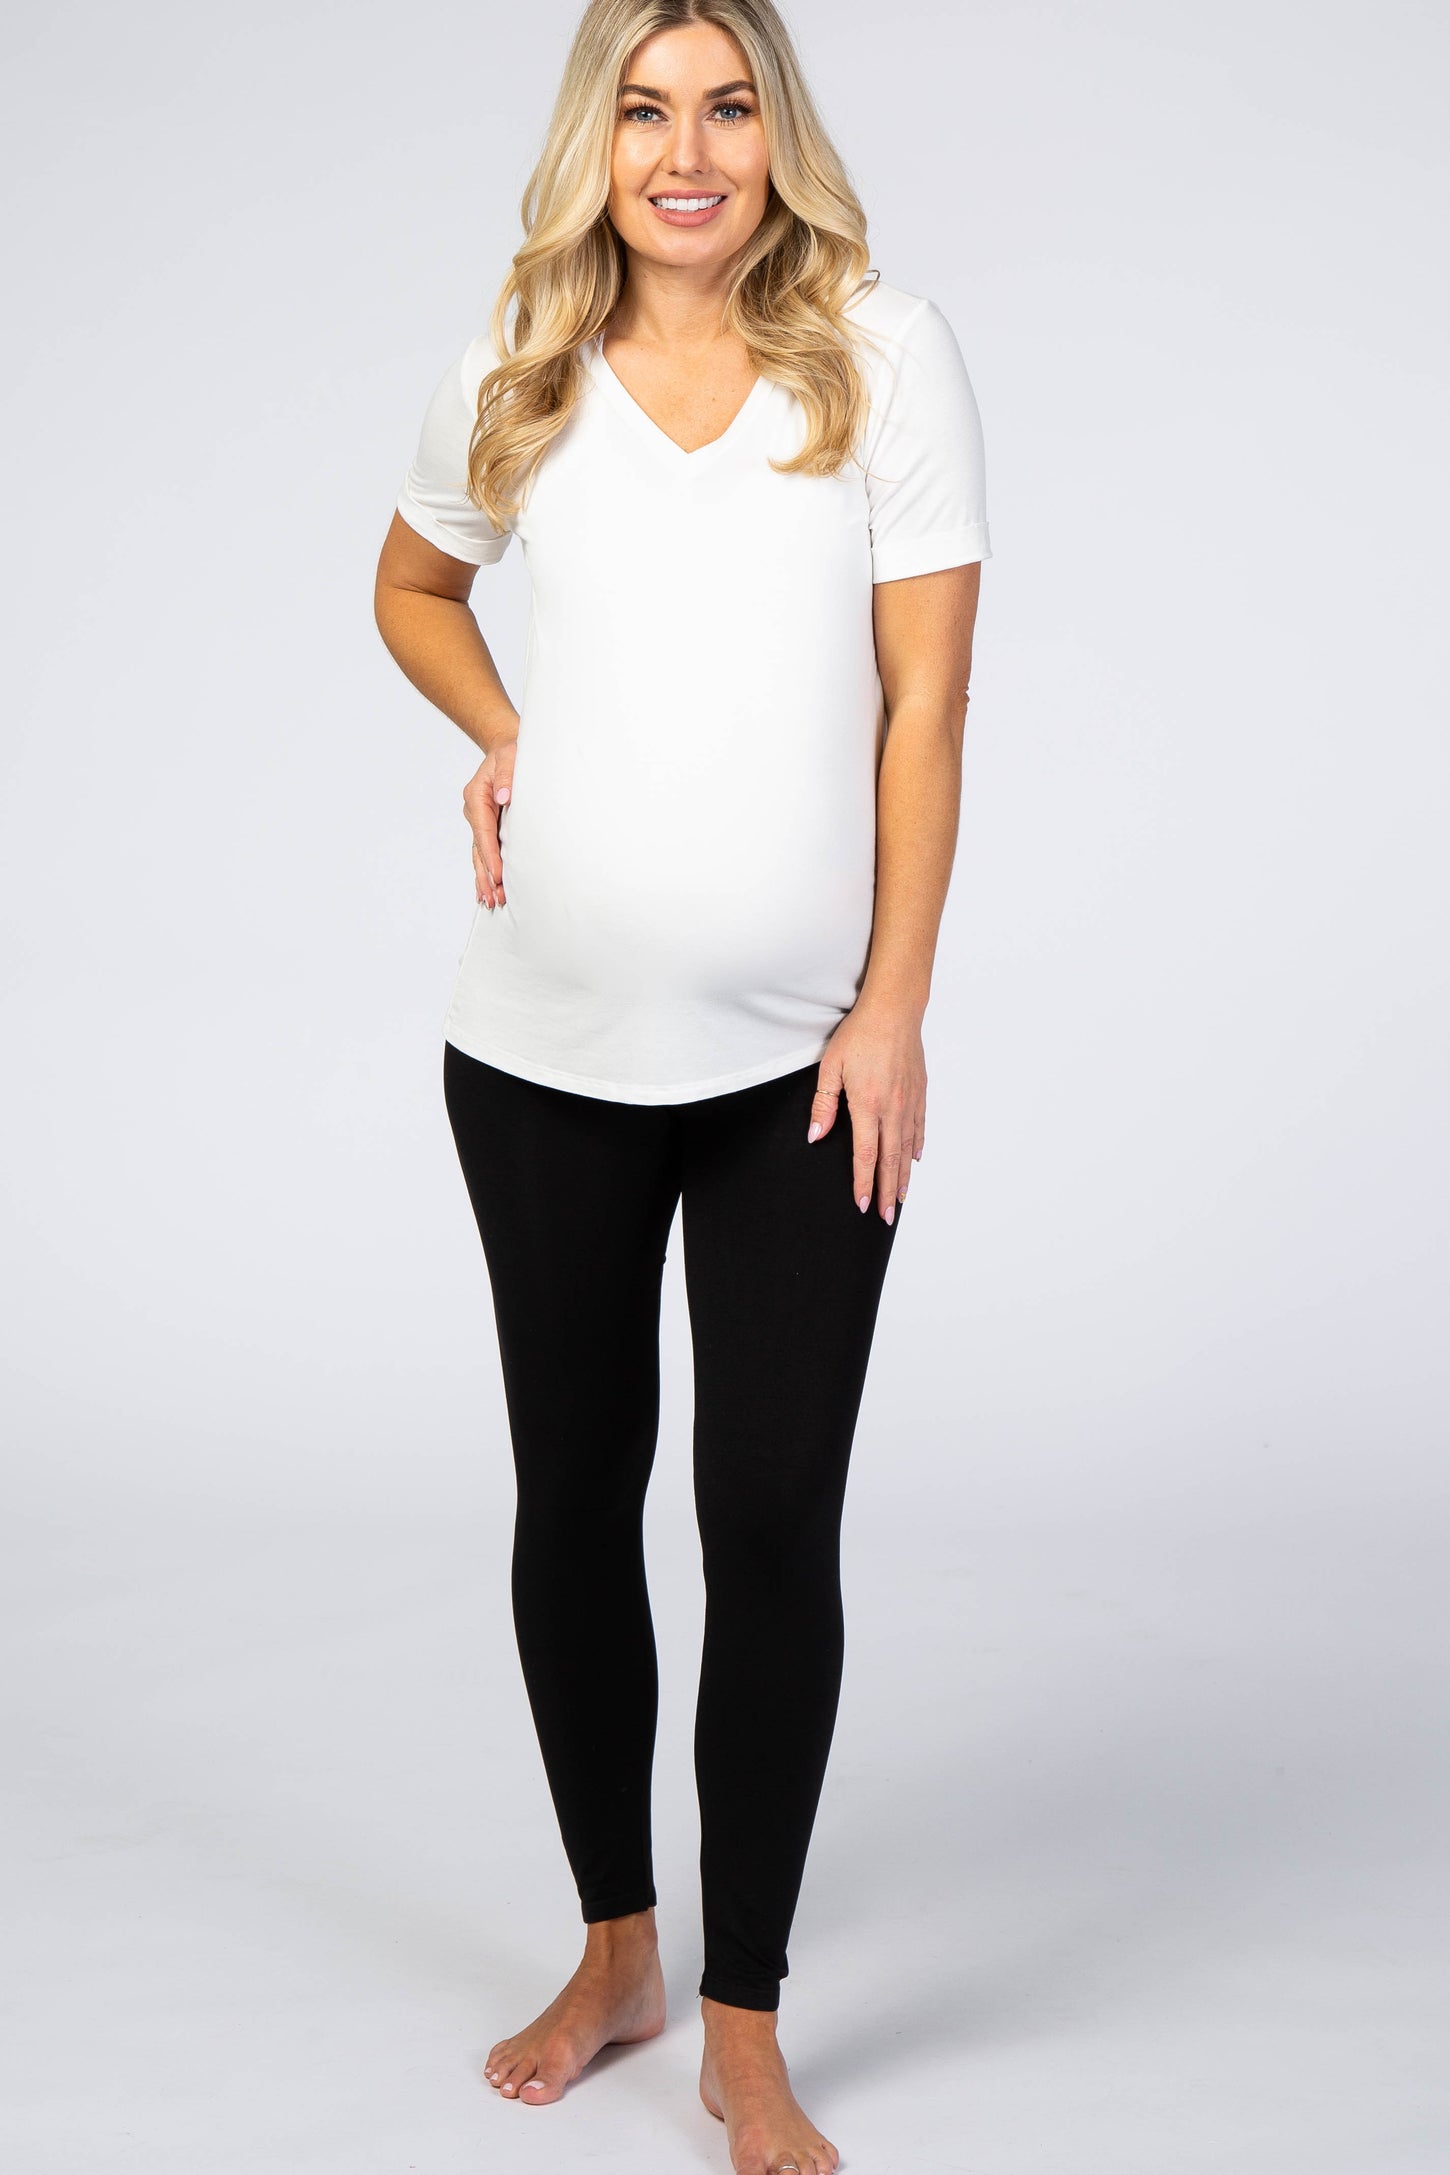 Belly Bandit Introduces Active Support Athleisure Line | California Apparel  News